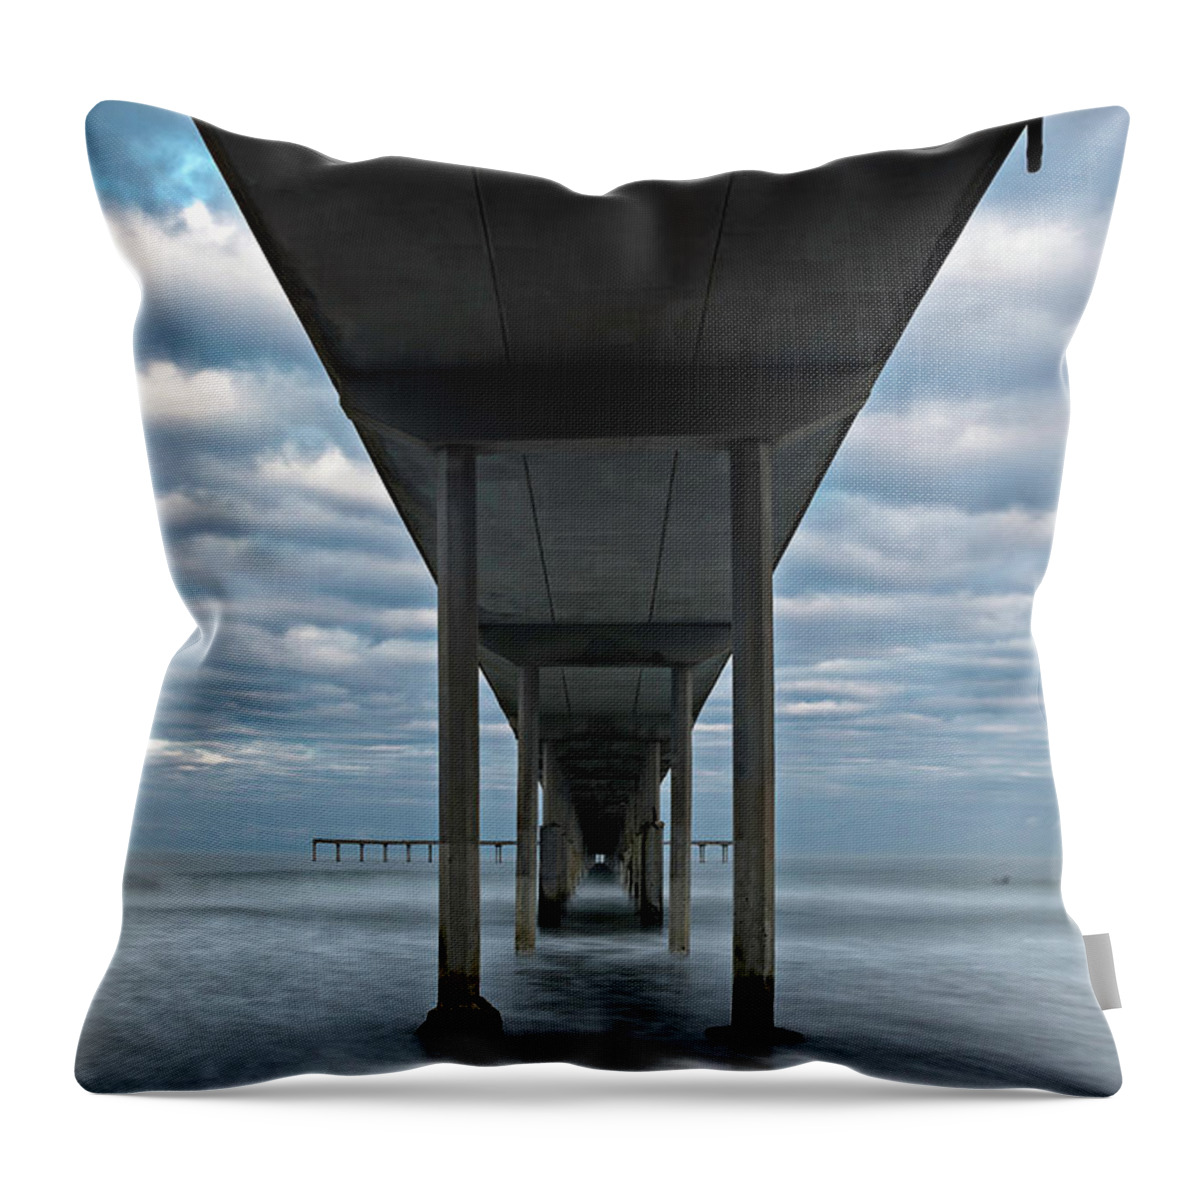 2017 Throw Pillow featuring the photograph Under the Ocean Beach Pier San Diego Early Morning by James Sage